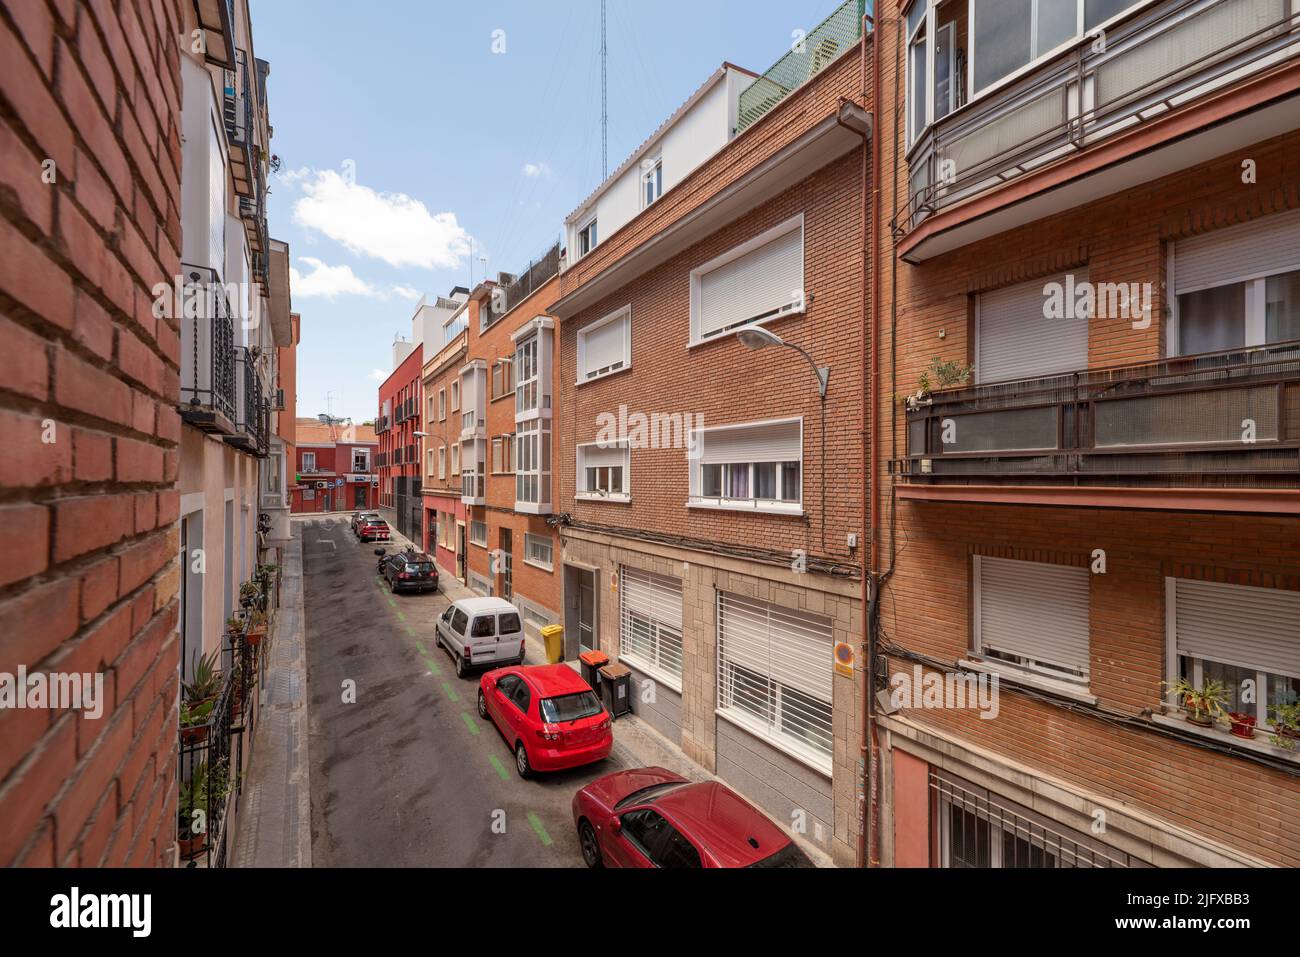 Narrow street with low-rise buildings with clay brick facades with balconies and terraces Stock Photo